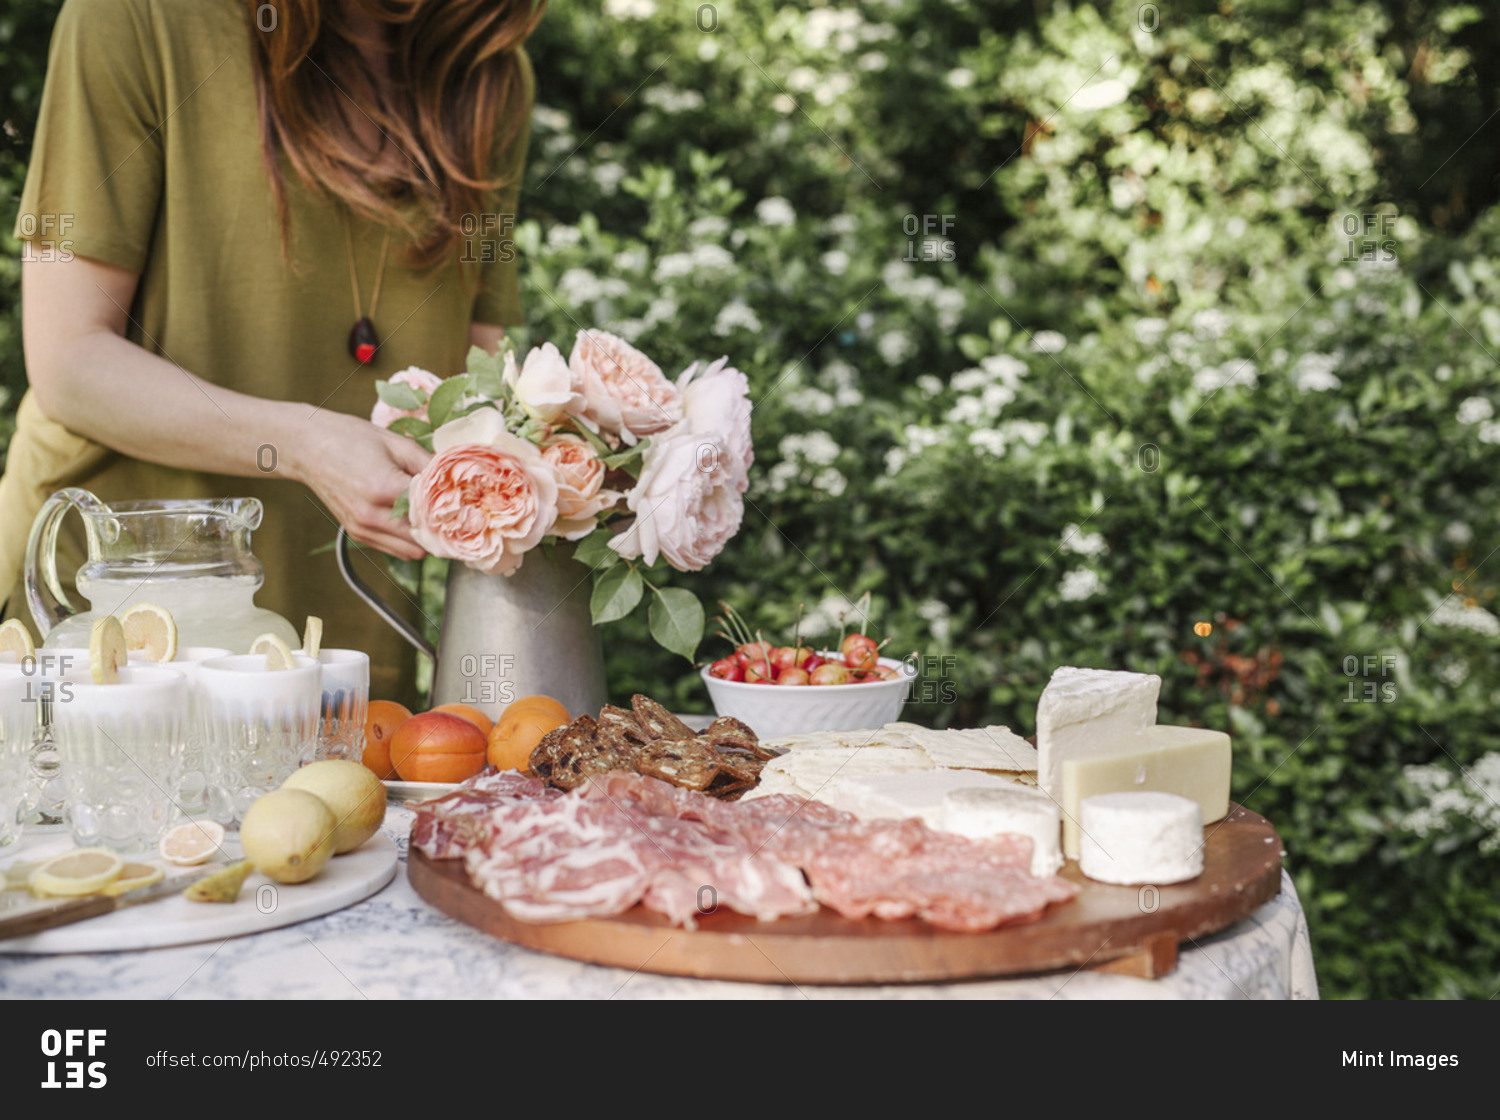 Woman standing at a table in a garden, a vase of pink roses, drinks, a bowl of cherries and a wooden board with cold cuts and cheese.